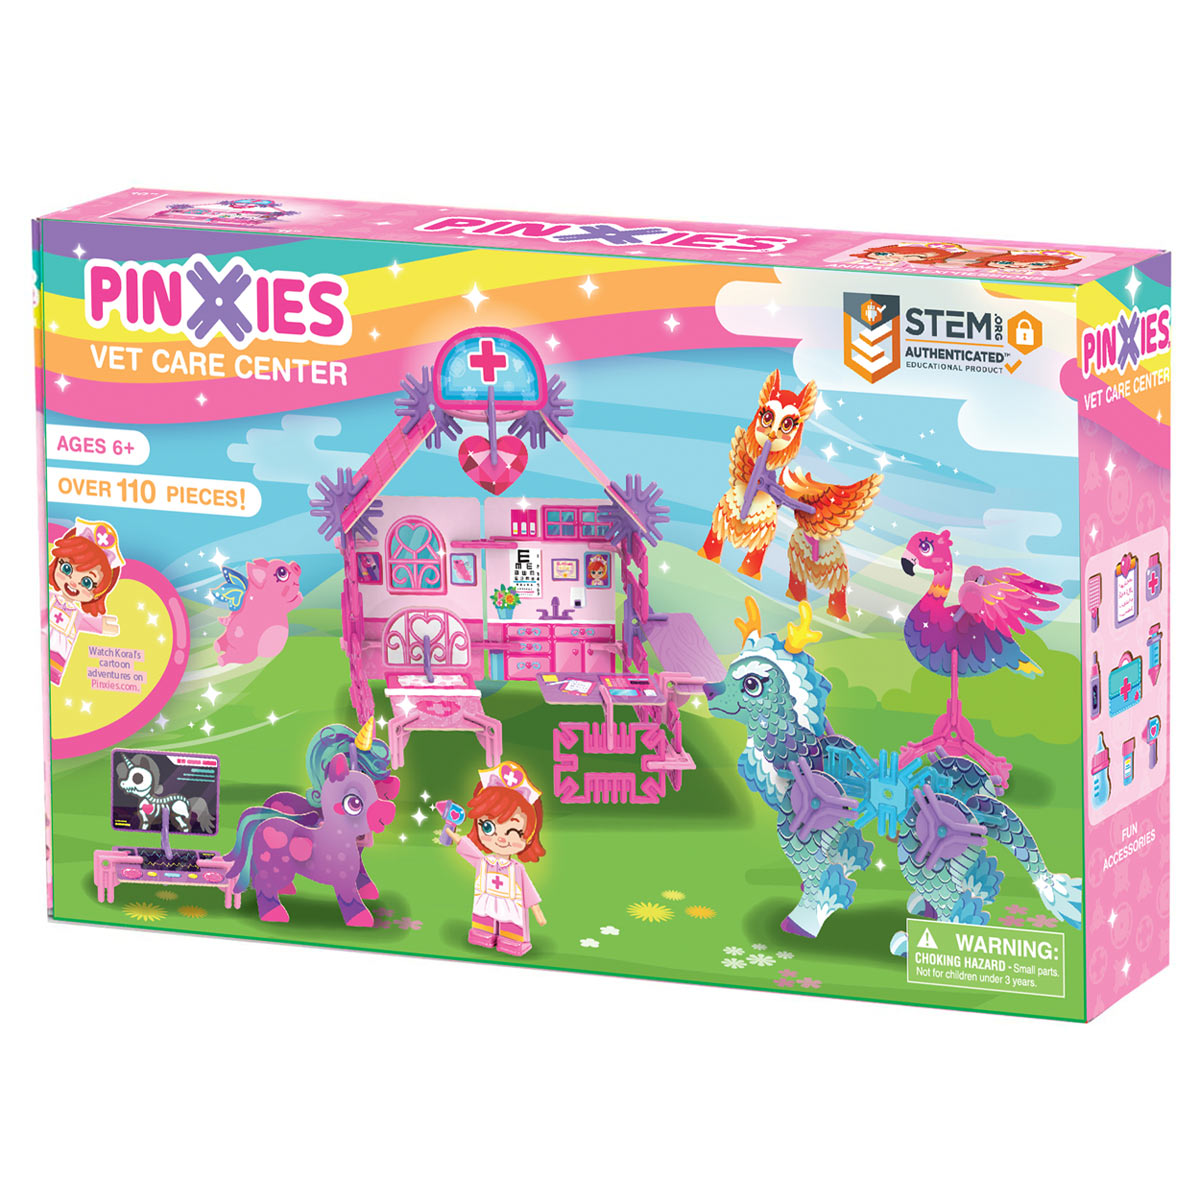 Pinxies Vet Care Center is a STEM authenticated building set for ages 6+